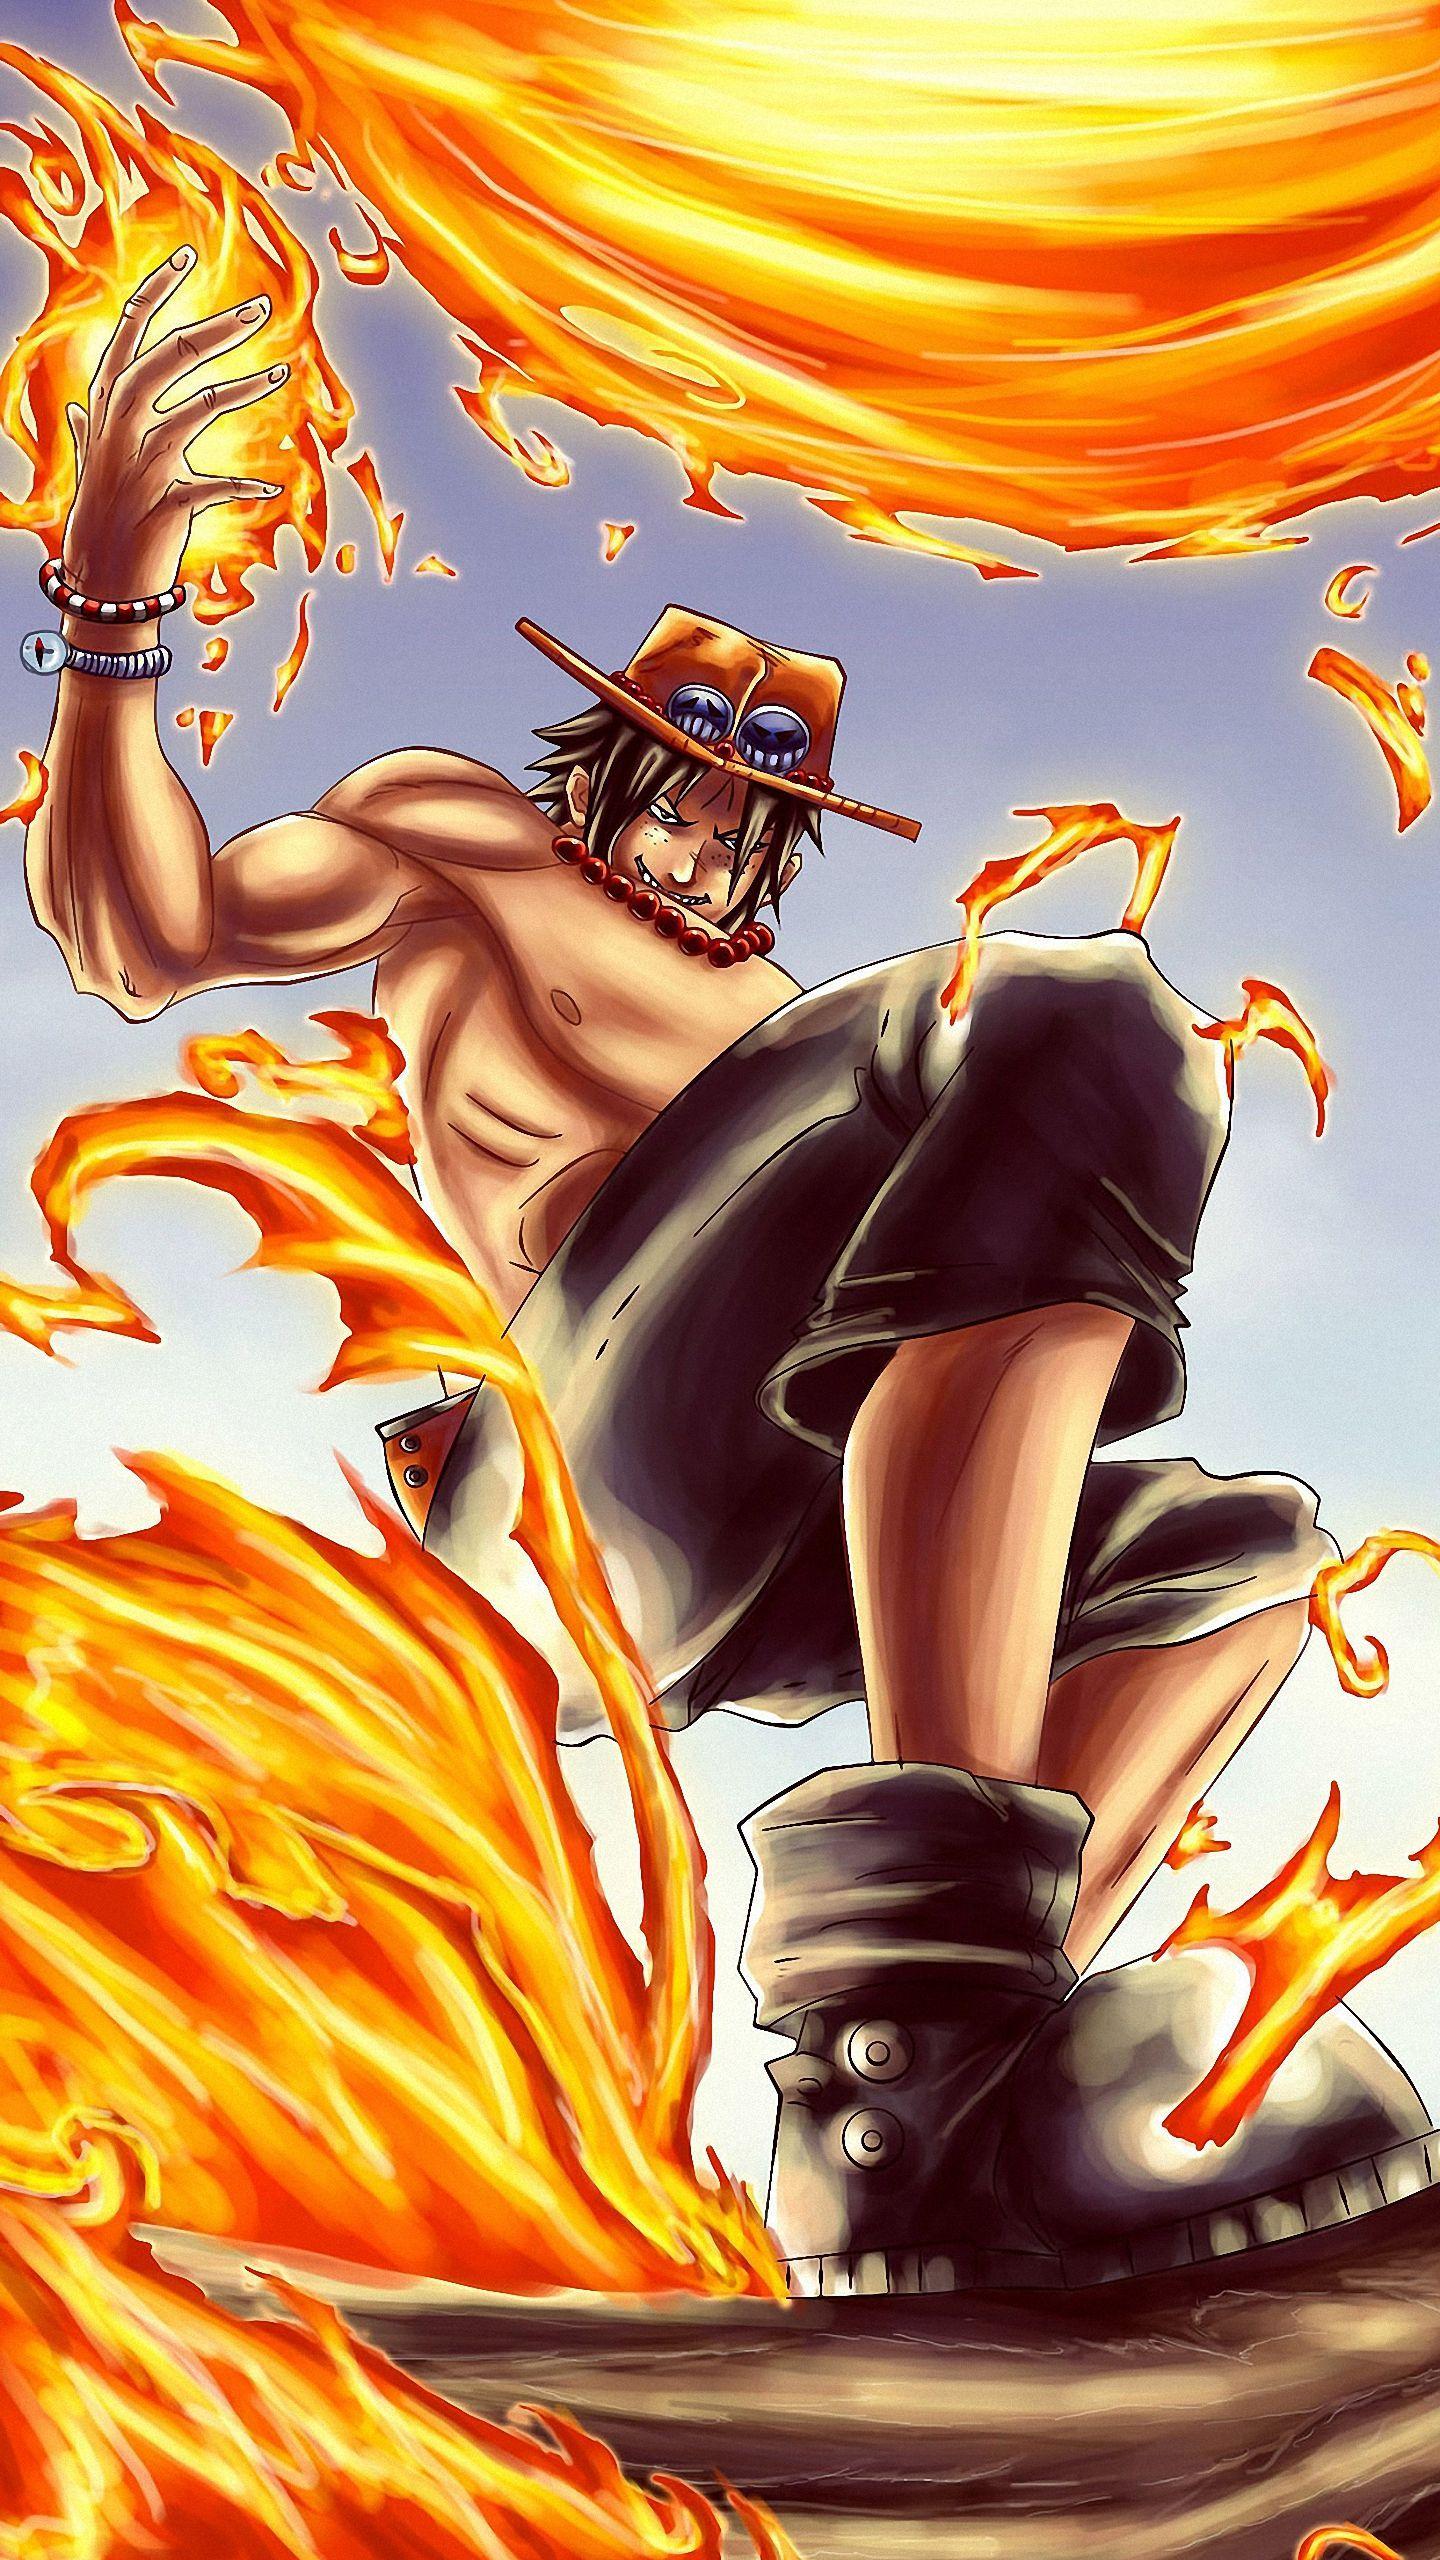 Ace One Piece Phone Wallpaper